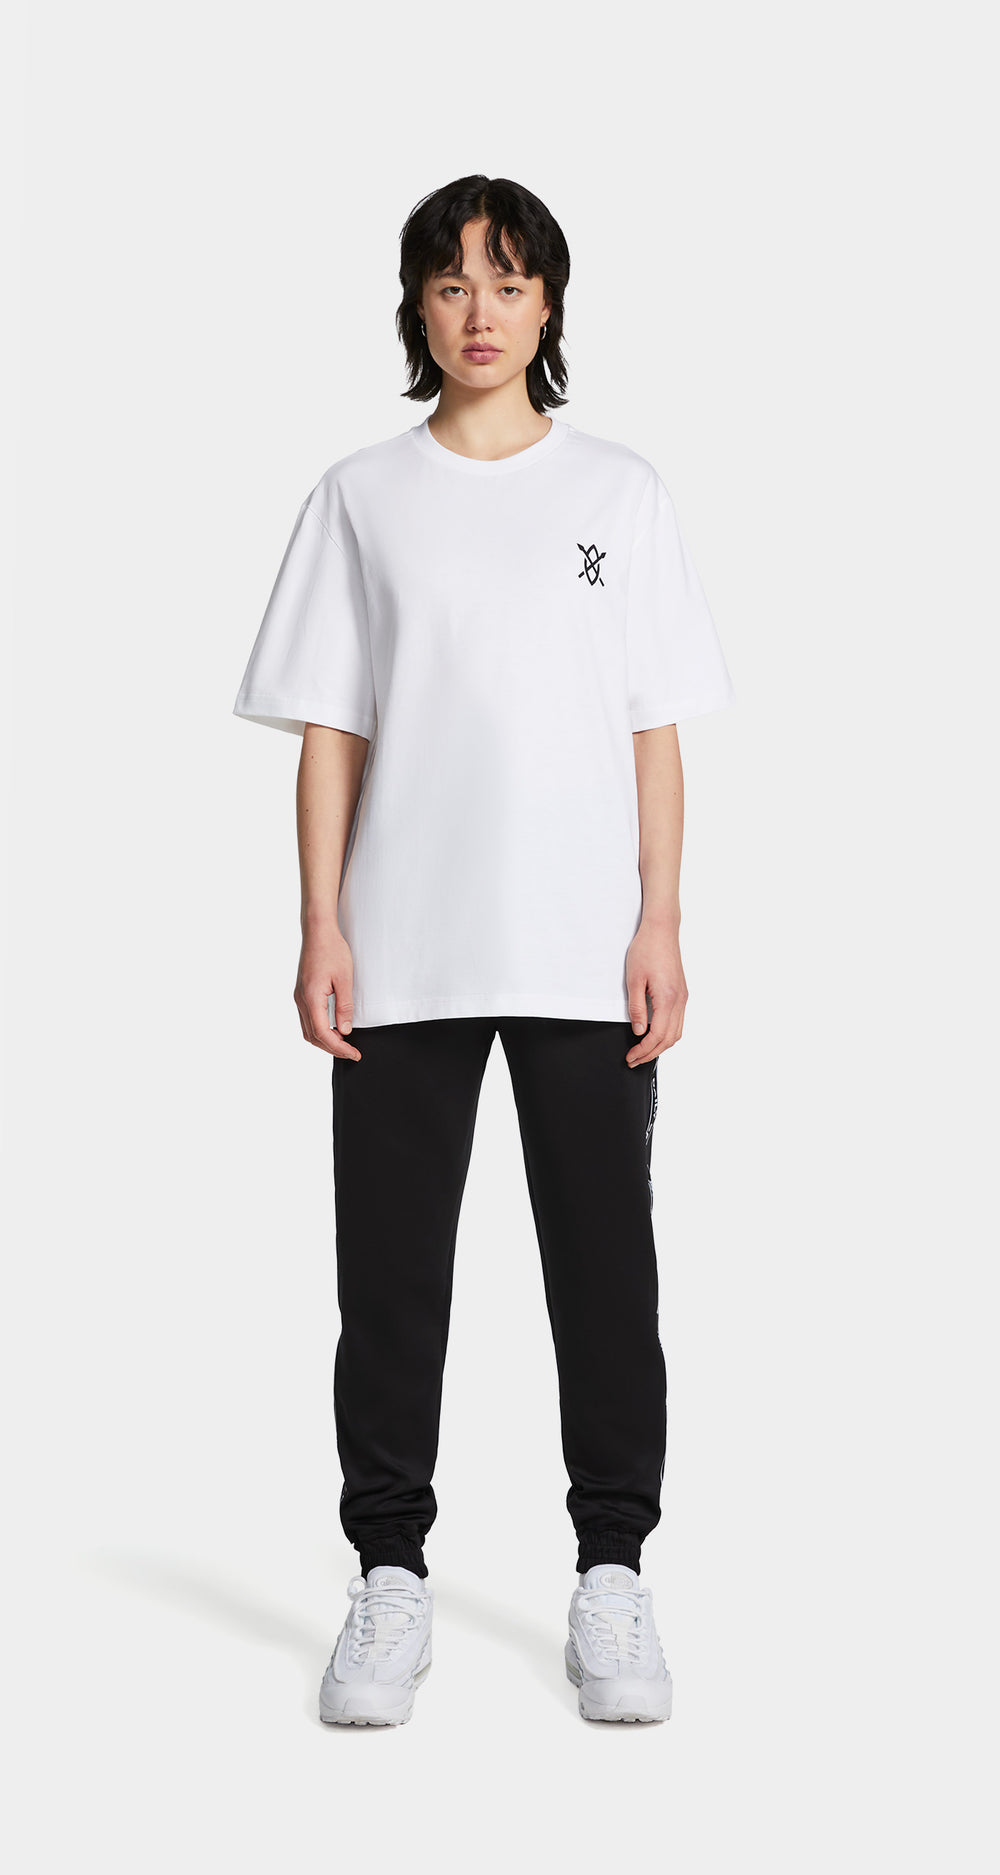 DP - White Amsterdam Flagship Store T-Shirt - Wmn - Front